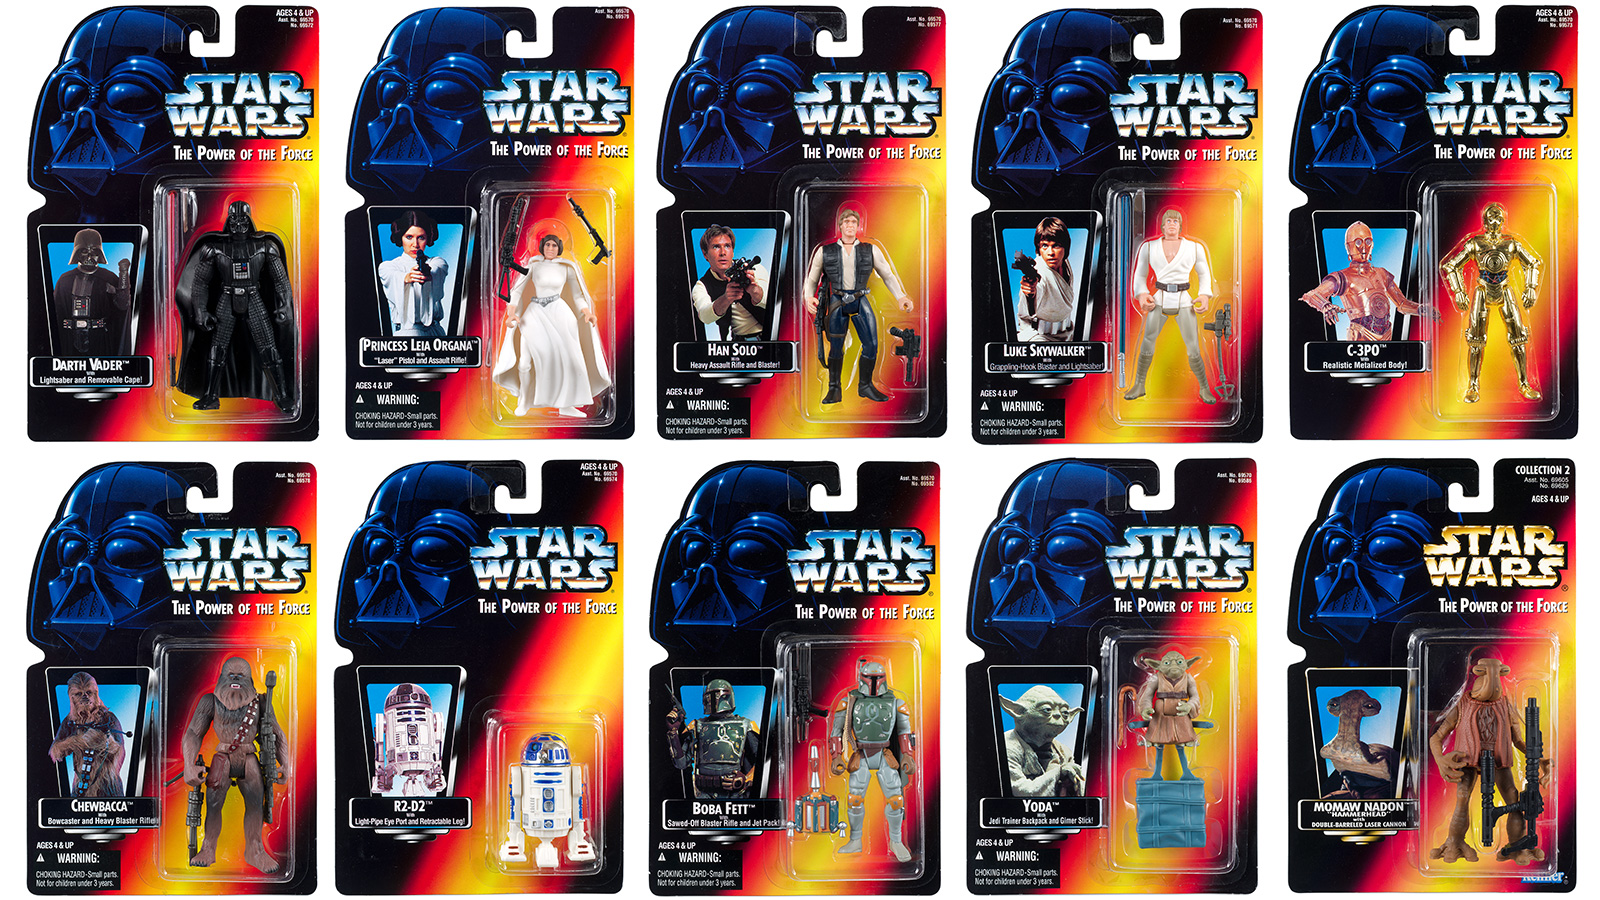 1995 - 1996 The Power Of The Force (Orange Packaged) Figures Added To Photo Gallery